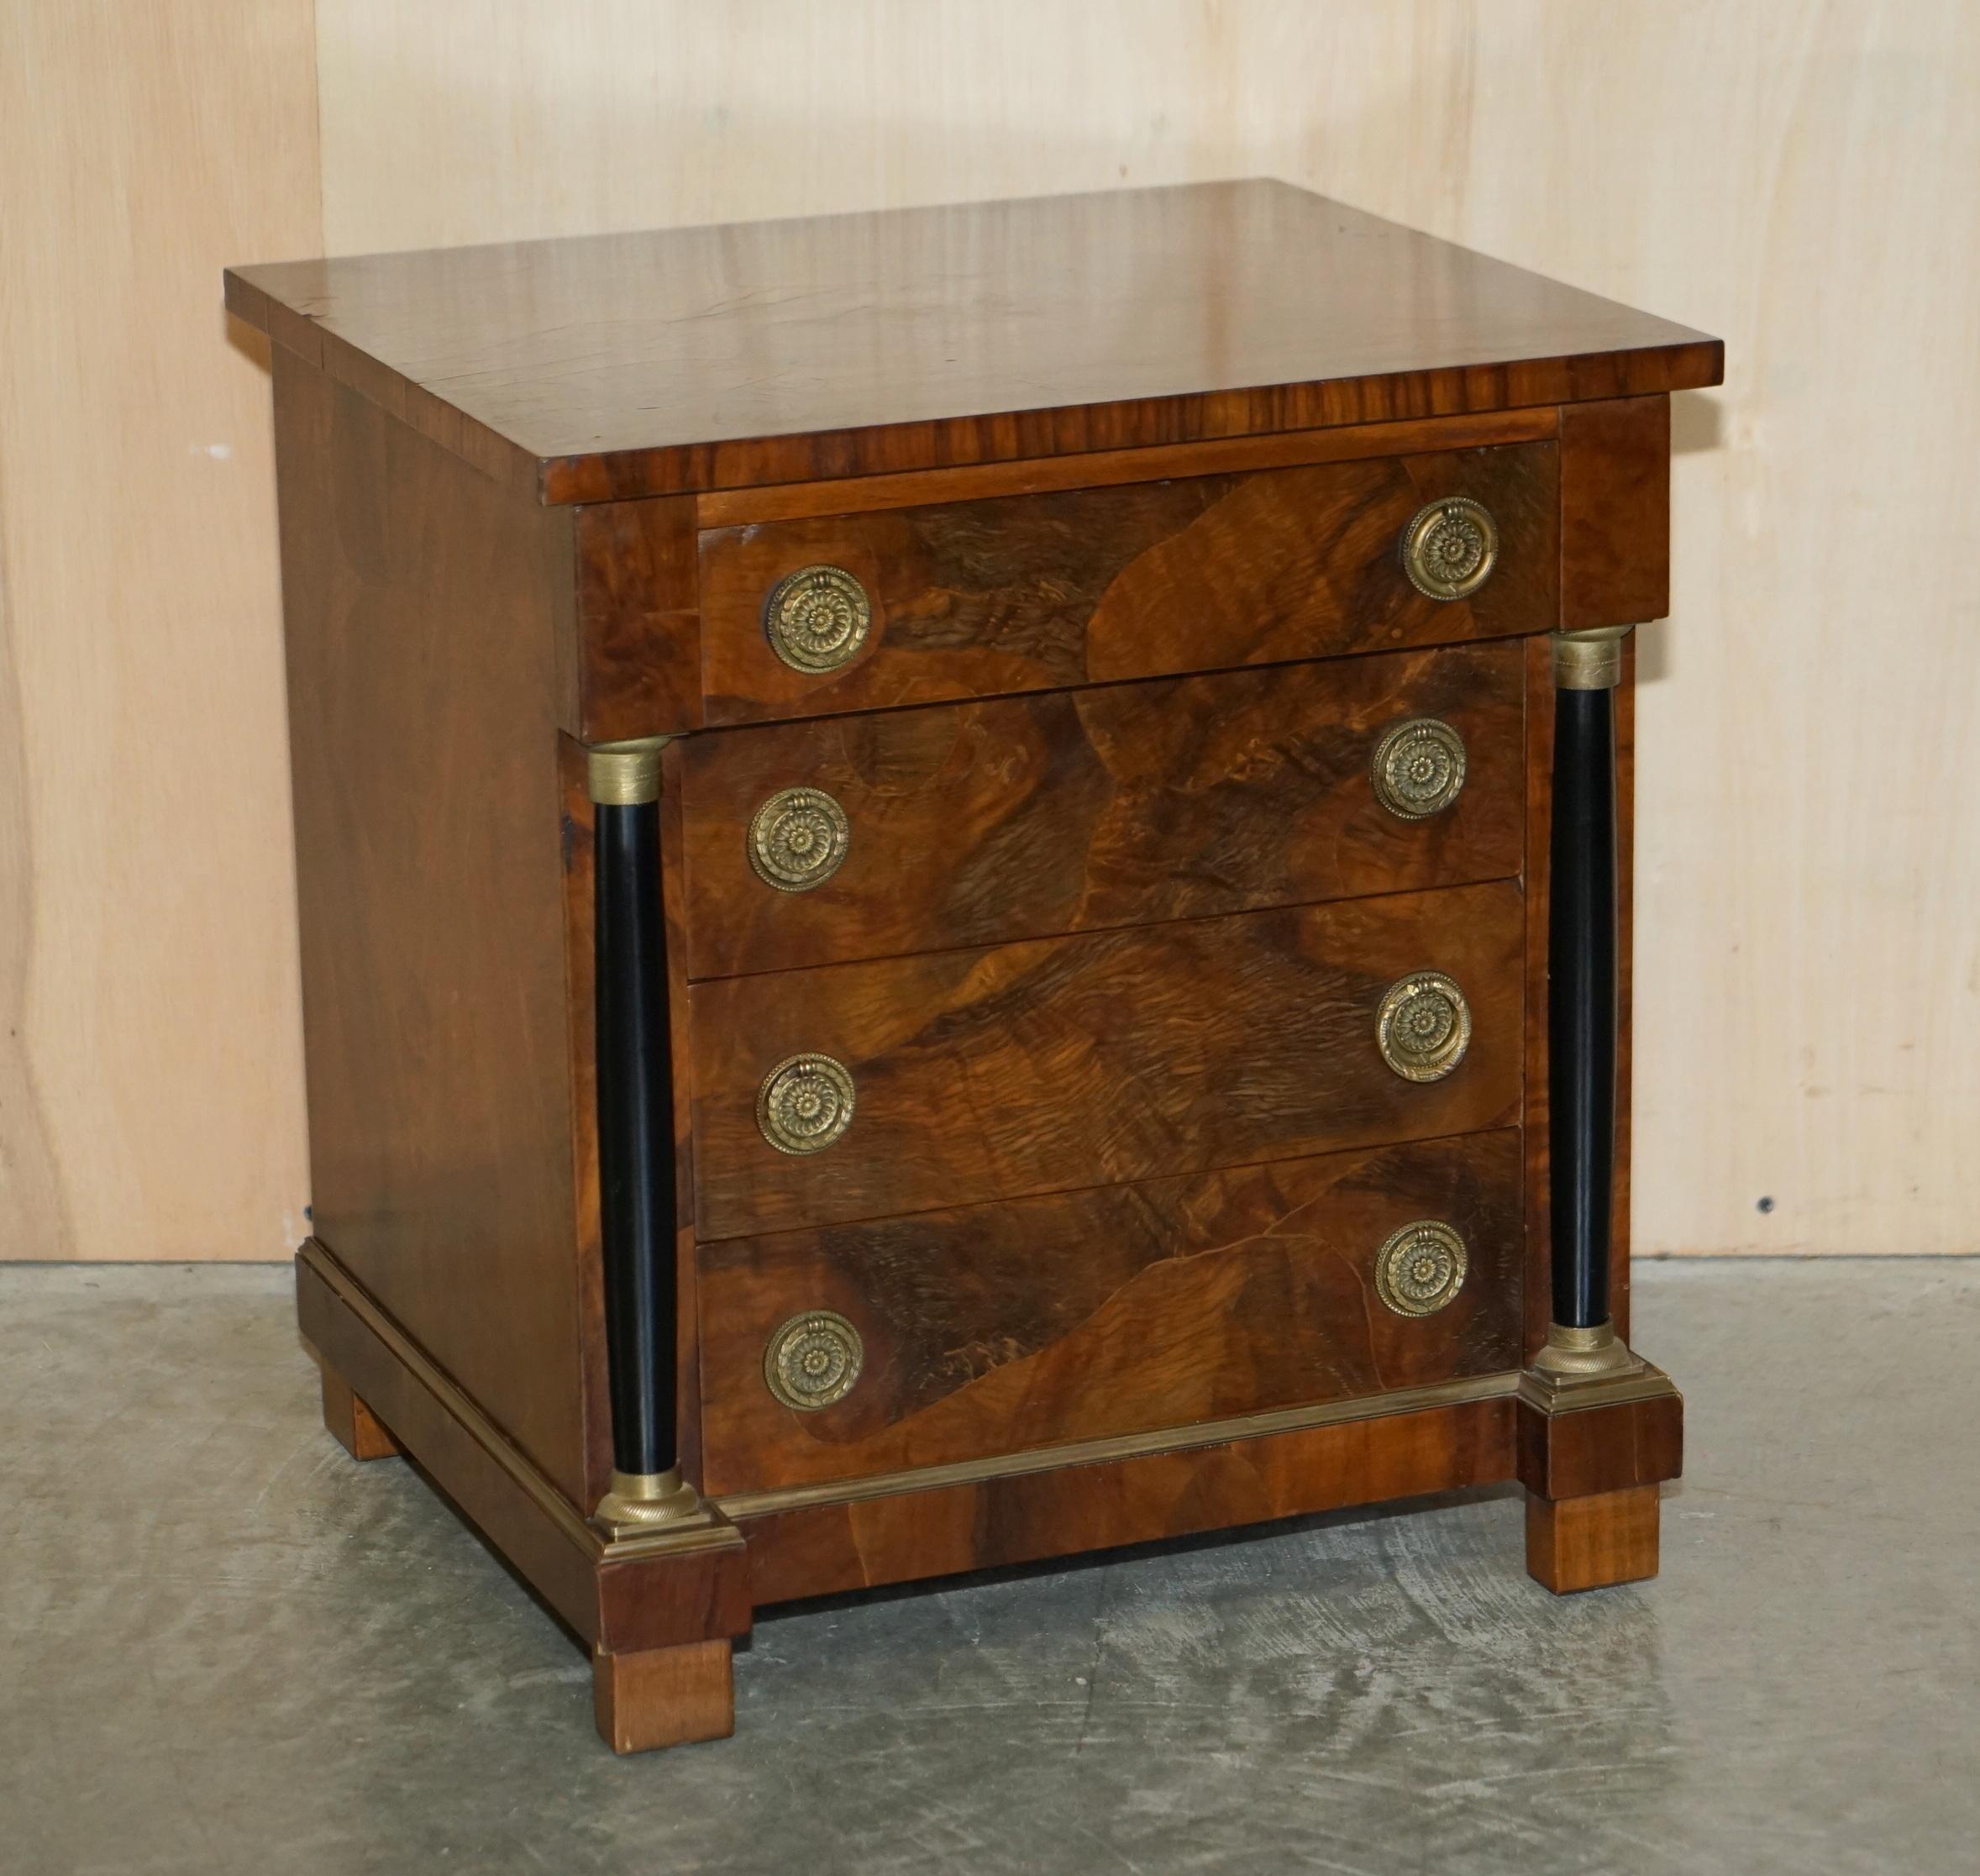 We are delighted to offer for sale this lovely pair of circa 1880-1900 Biedermeier, Burr & Burl walnut nightstands or side table drawers.

These are very collectable and decorative, they can be used as nightstands in a bedroom context or lamp side